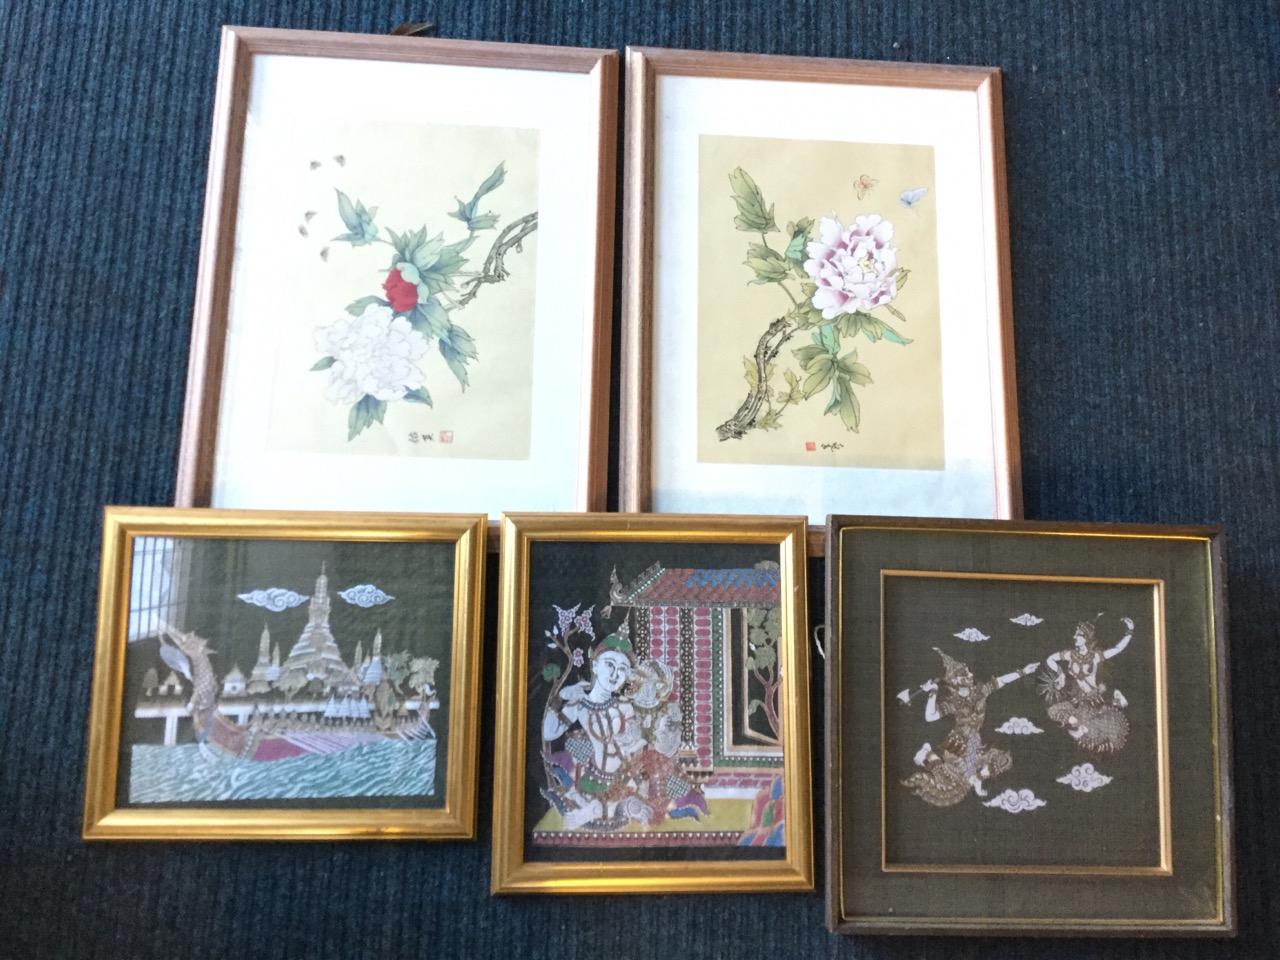 A pair of Chinese blossom foliage fabric prints with bees and butterflies, in limed oak frames; - Image 2 of 6